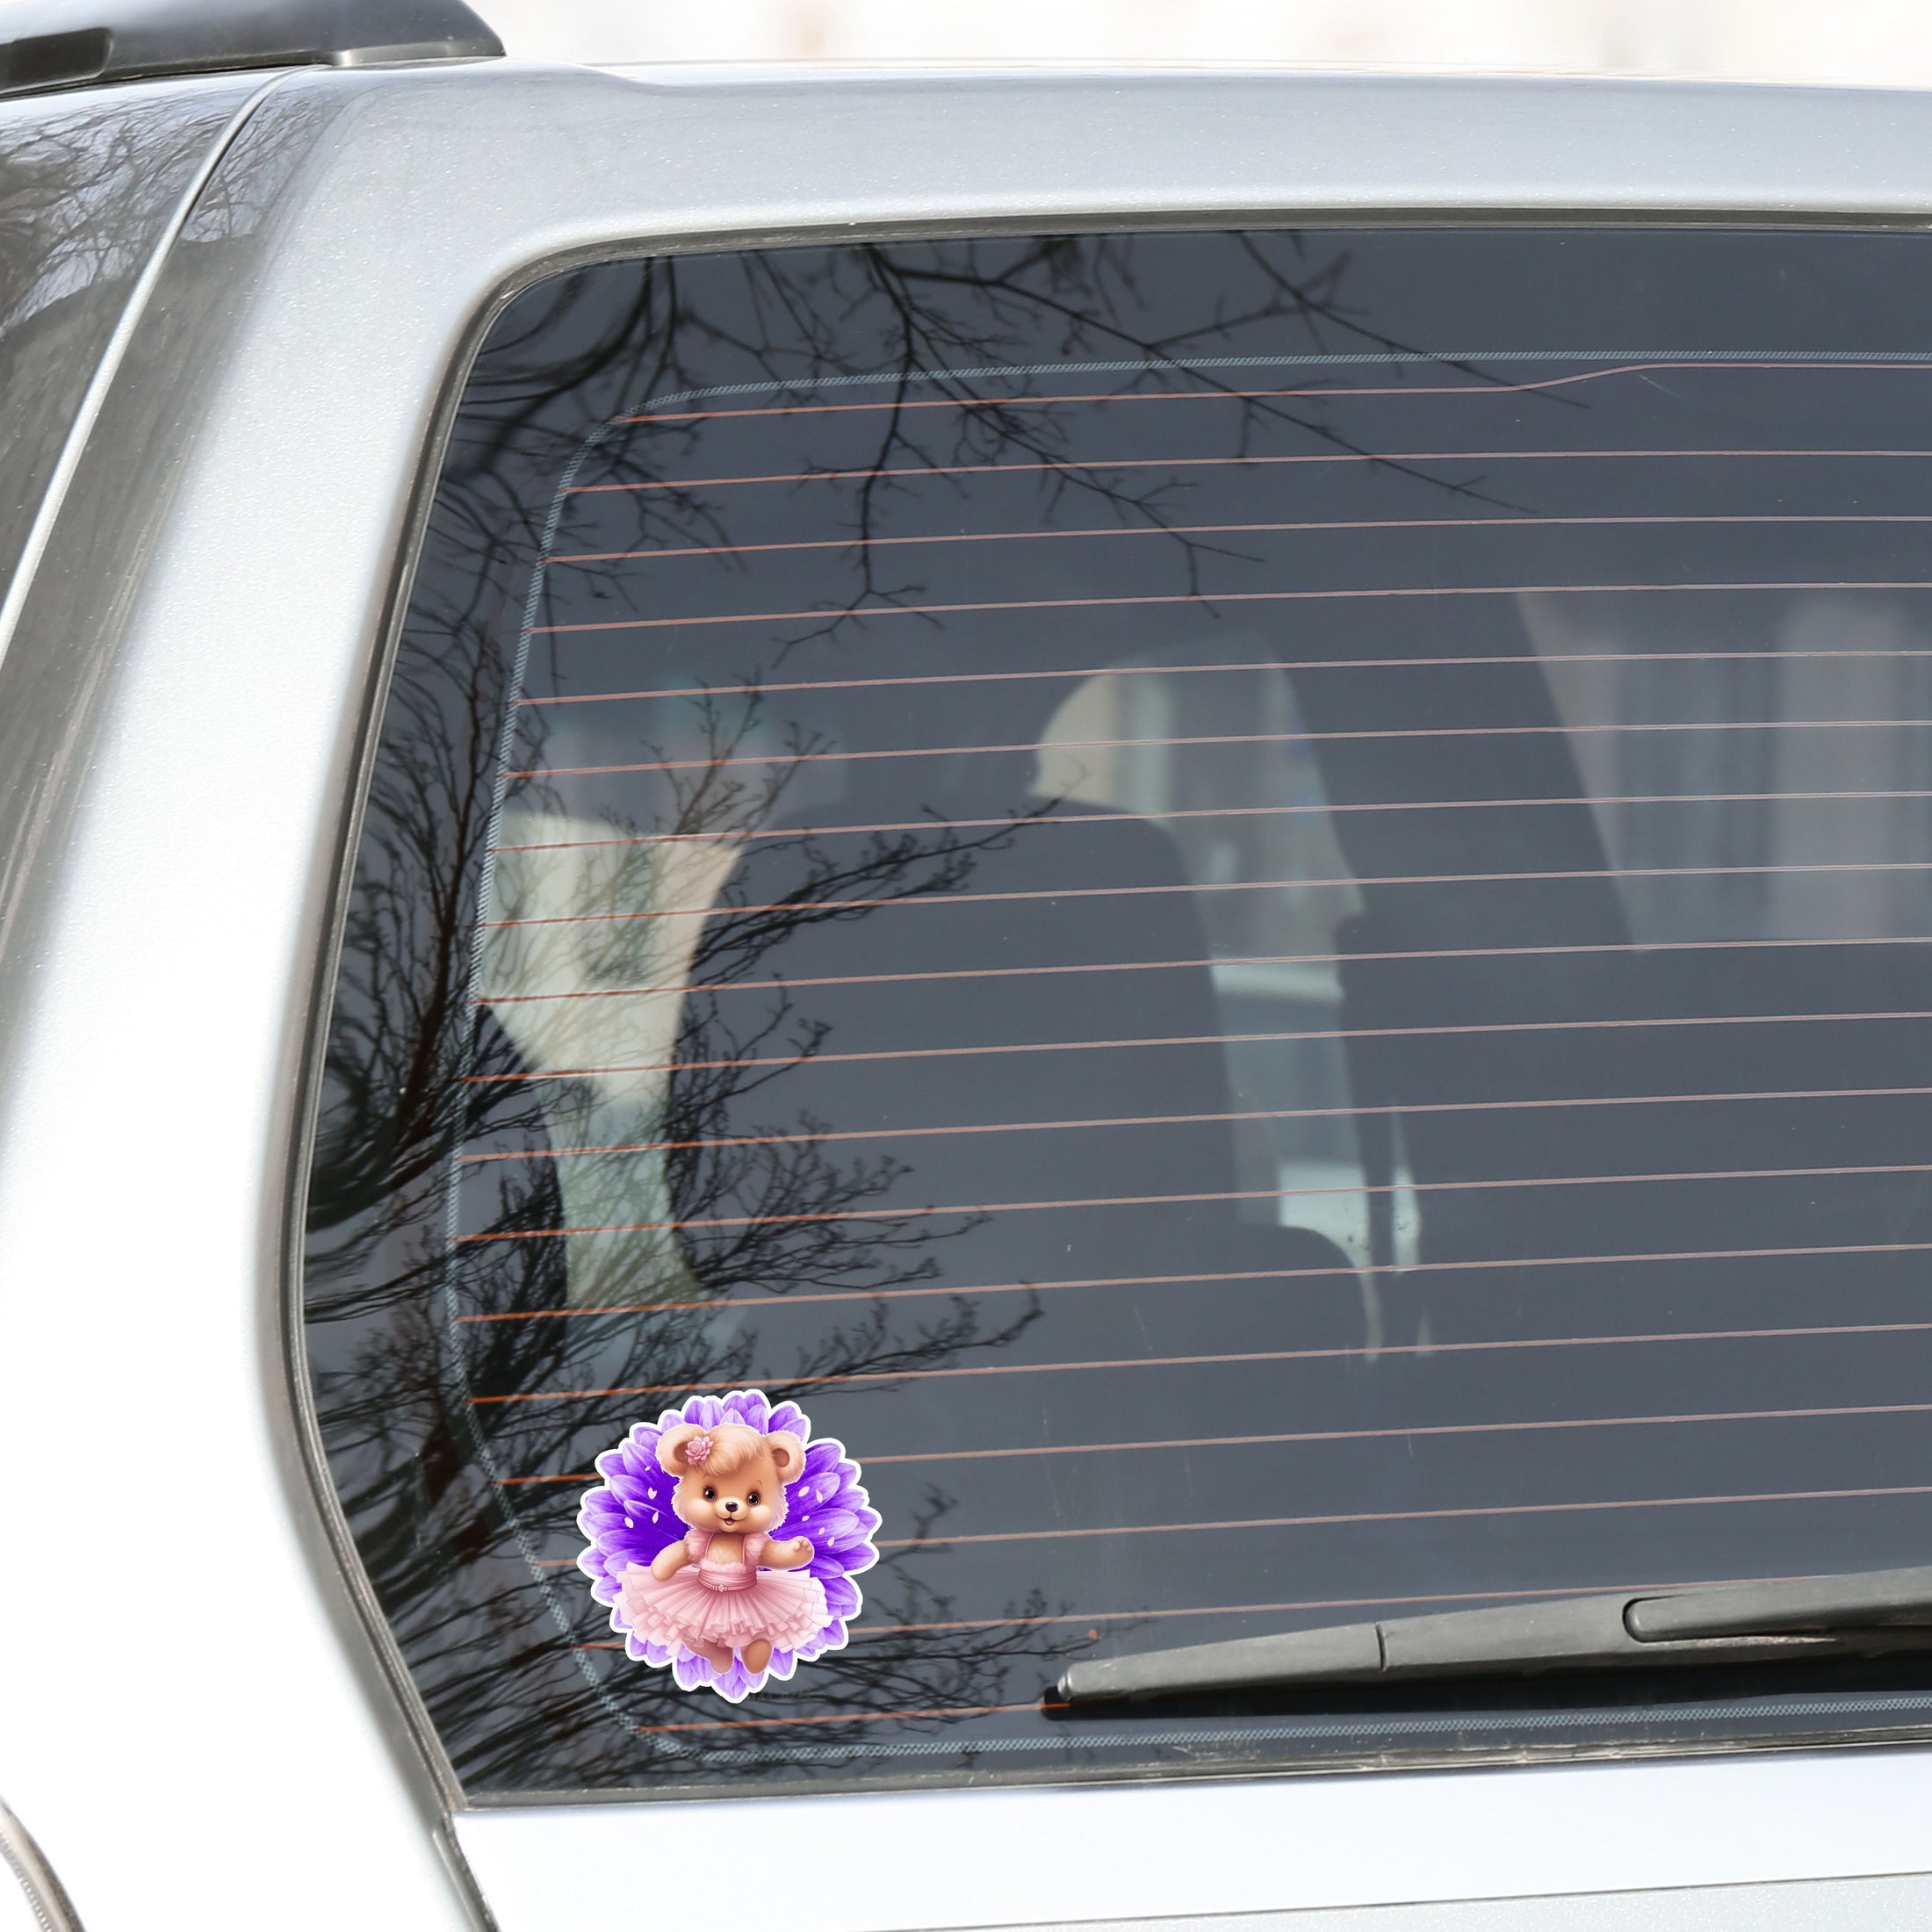 This image shows the teddy bear on purple sticker on the back window of a car.